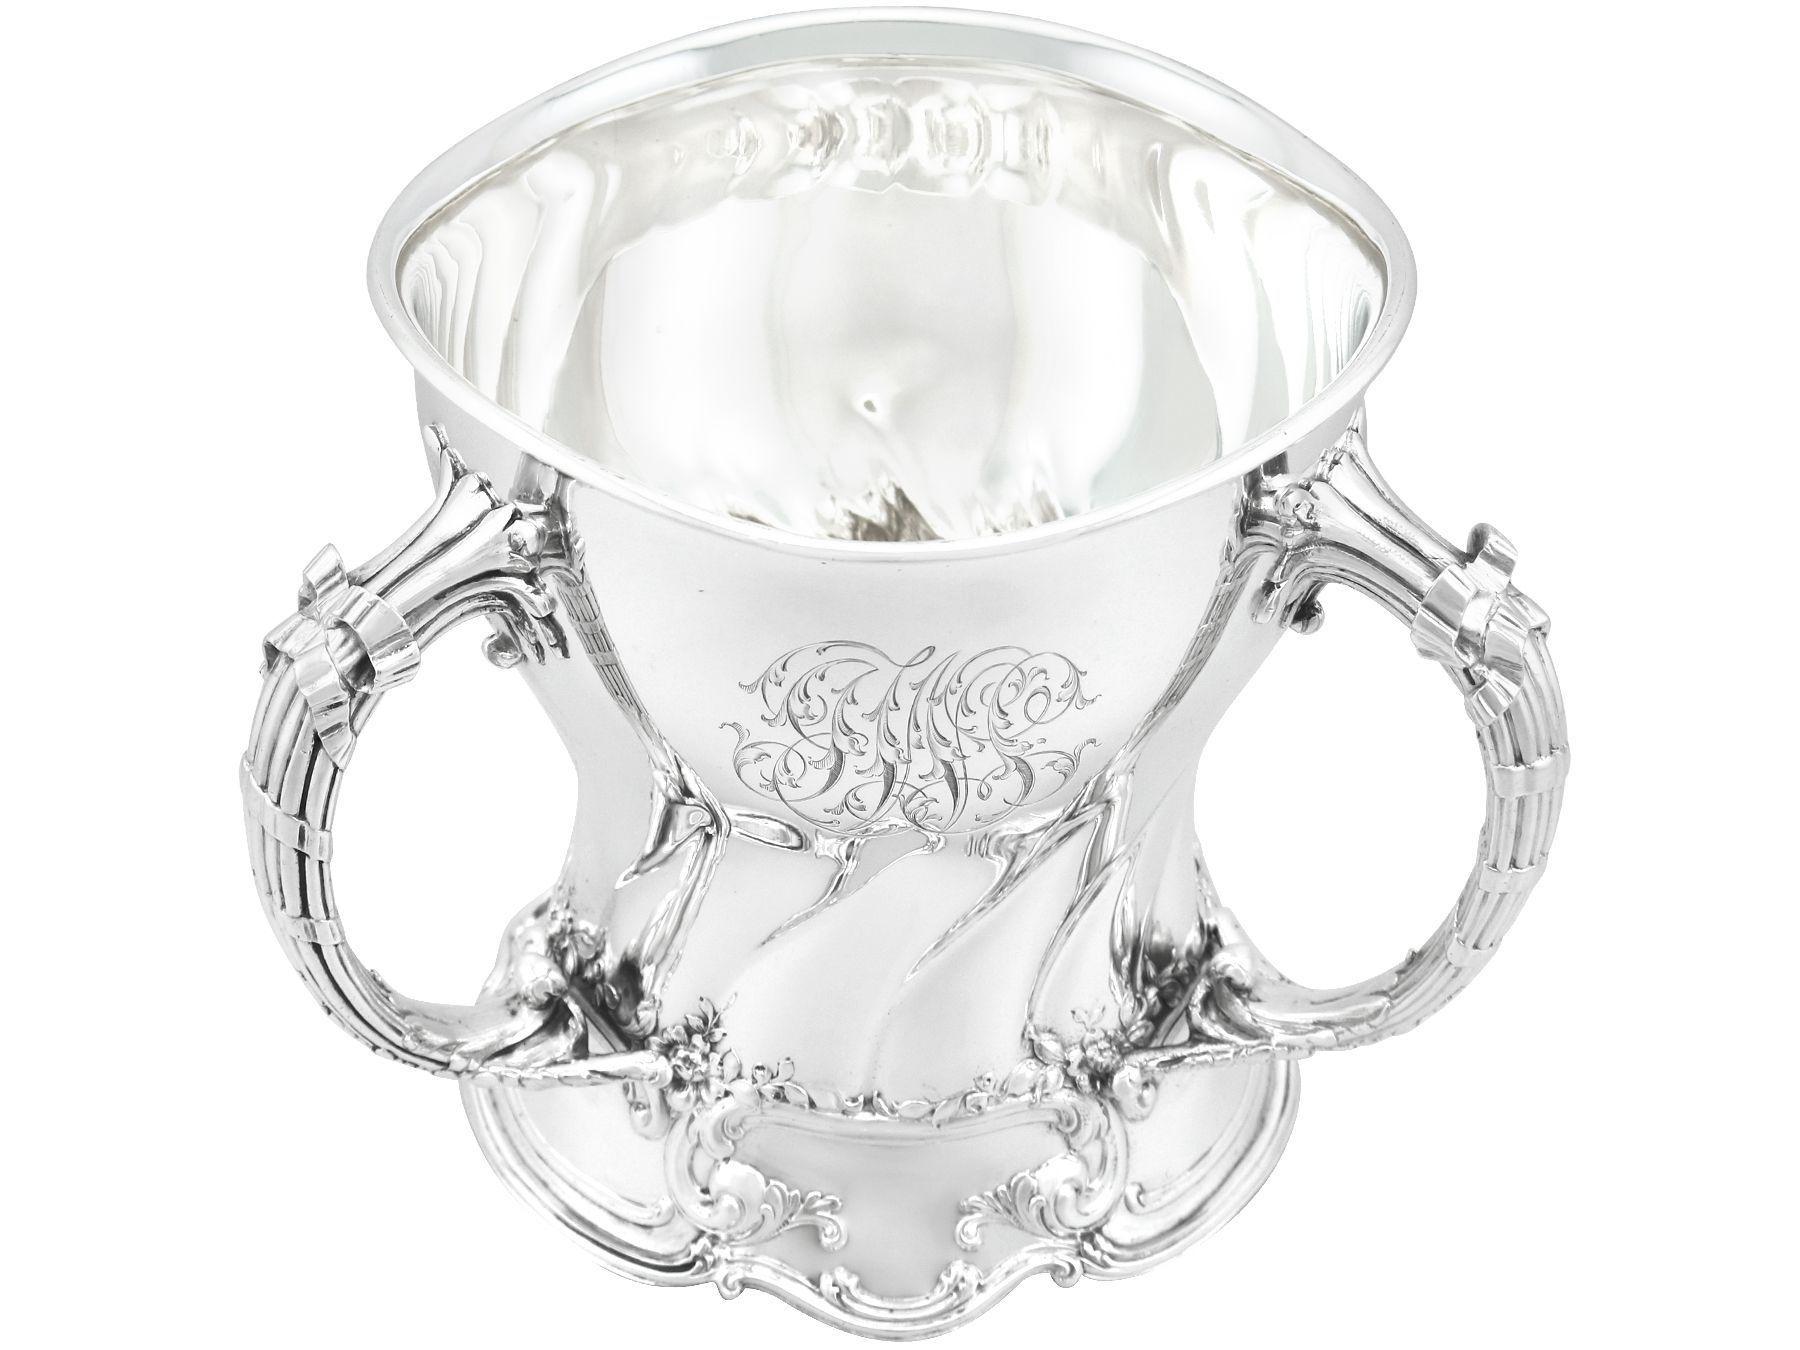 Antique Art Nouveau American Sterling Silver Tyg Presentation / Champagne Cup In Excellent Condition For Sale In Jesmond, Newcastle Upon Tyne